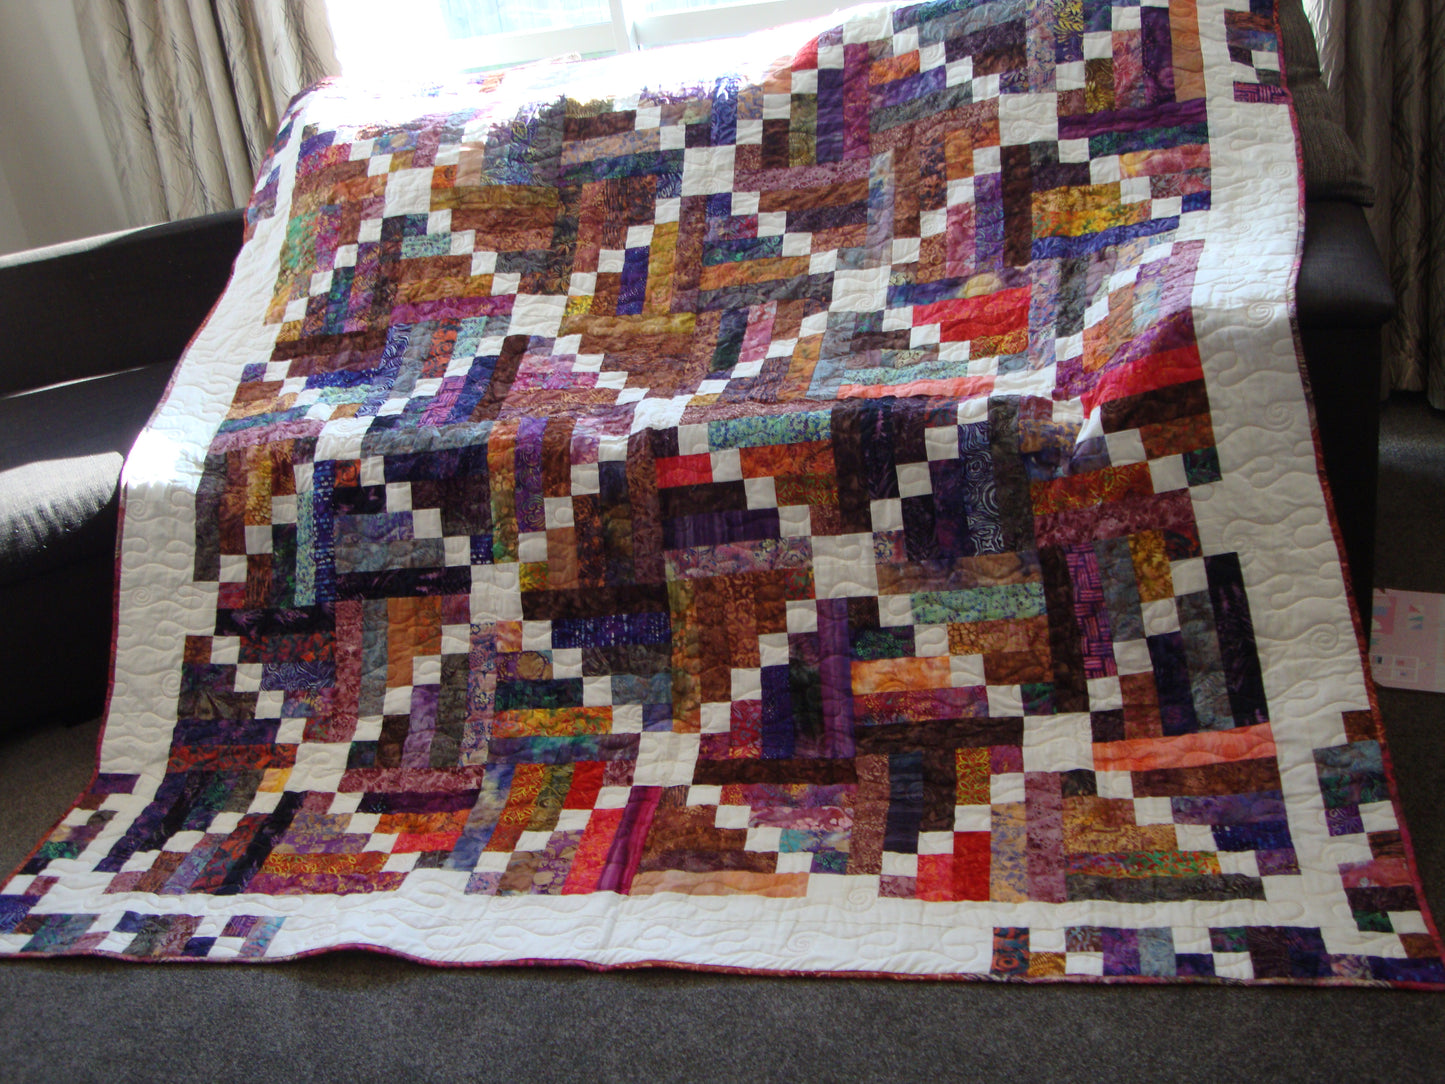 Stair Step quilt